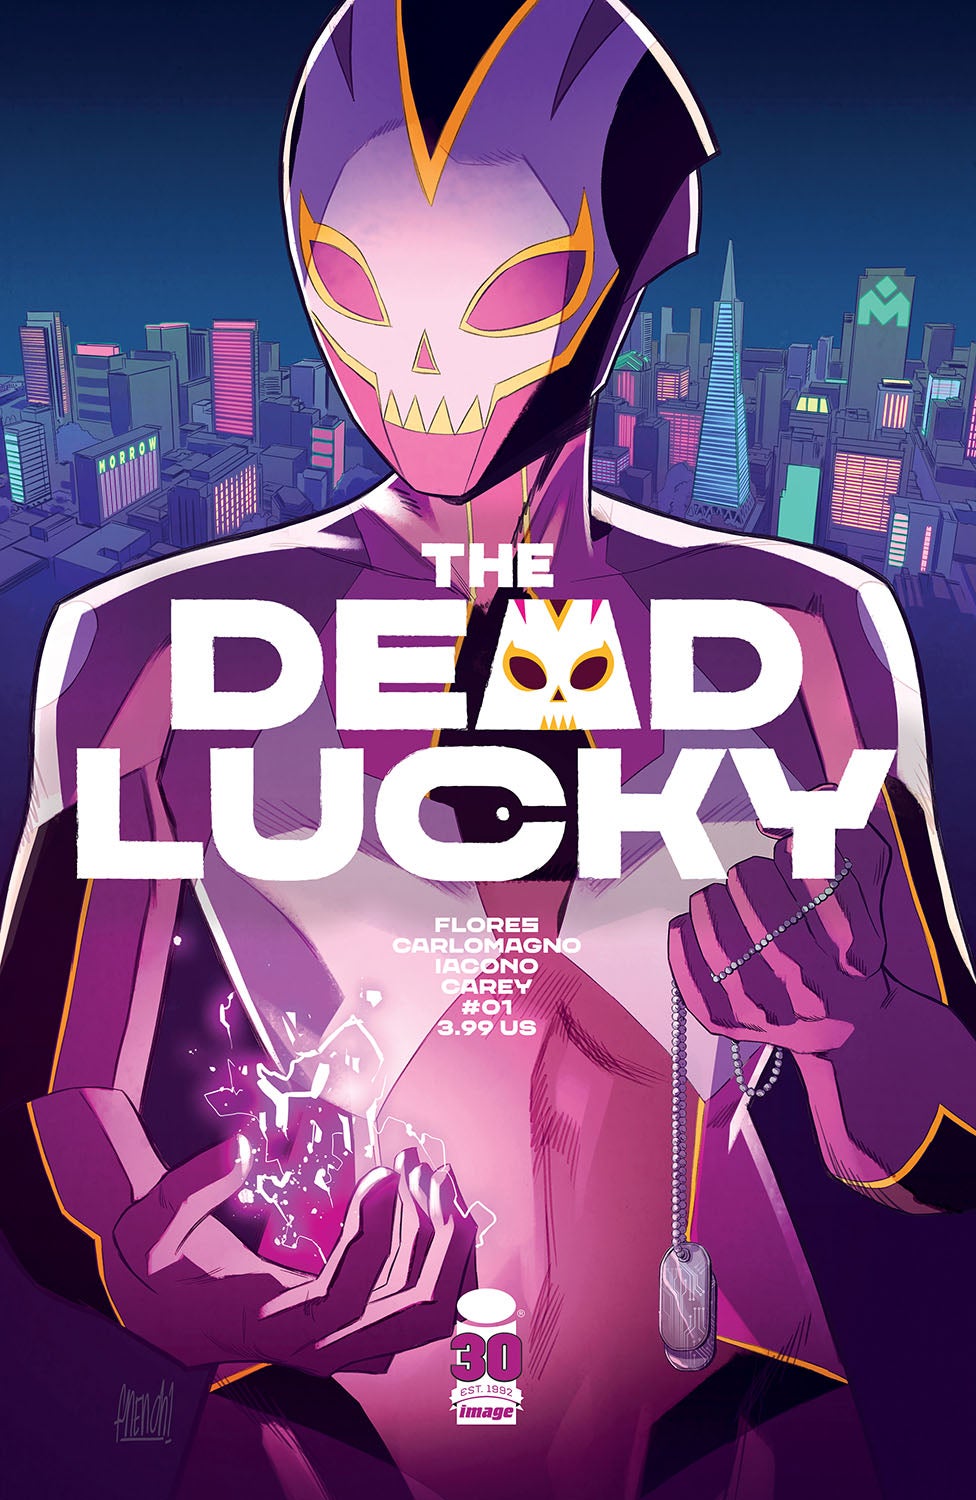 The Dead Lucky #1 cover by Franco Carlomagno. (Image: Image Comics)